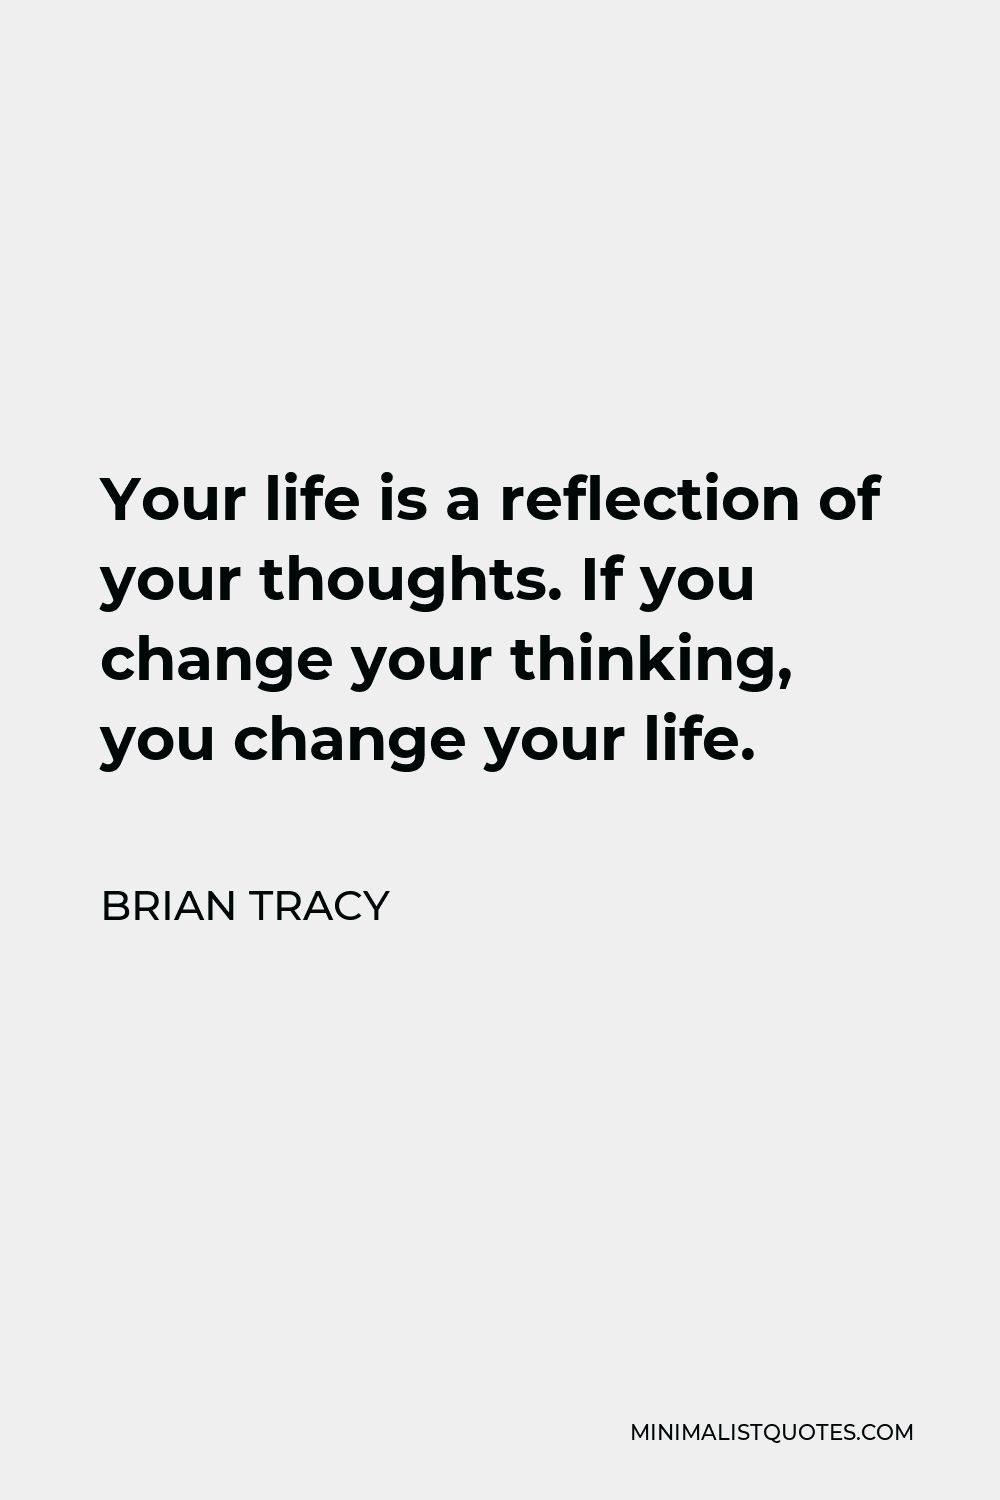 Brian Tracy Quote - Your life is a reflection of your thoughts. If you change your thinking, you change your life.